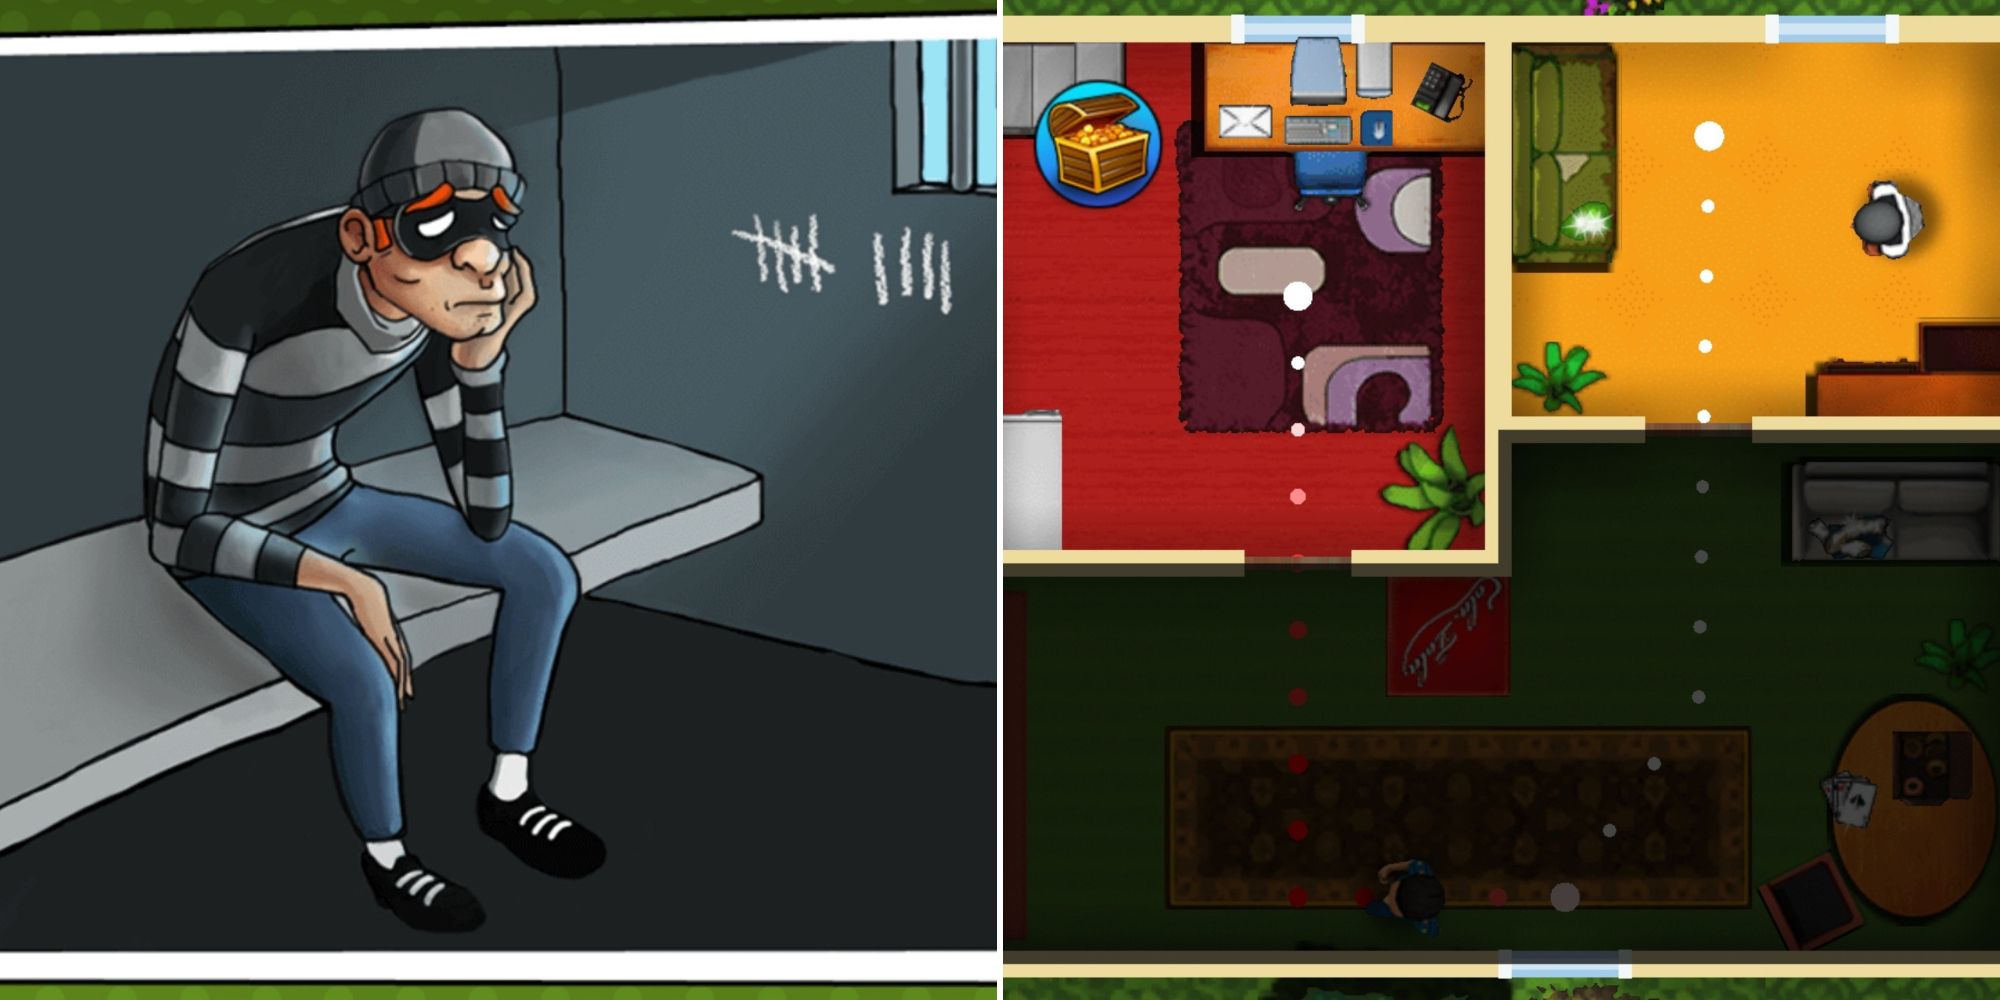 Bob sitting in his jail cell (left) and Bob sneaking in a house to steal loot (right) (from Robbery Bob - The Boss Thief)